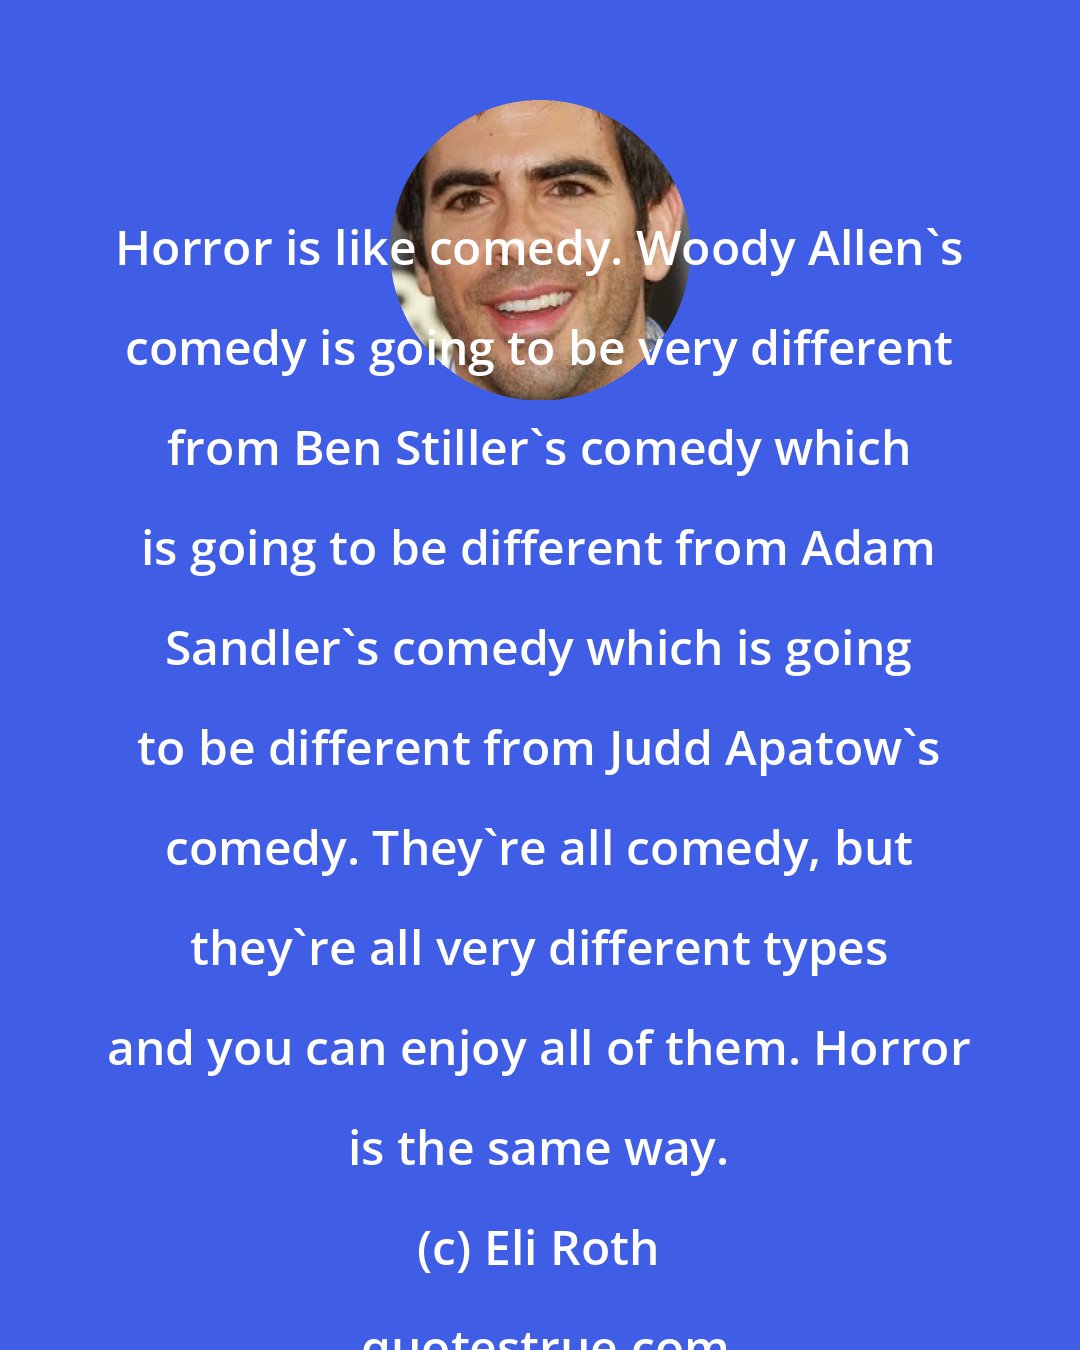 Eli Roth: Horror is like comedy. Woody Allen's comedy is going to be very different from Ben Stiller's comedy which is going to be different from Adam Sandler's comedy which is going to be different from Judd Apatow's comedy. They're all comedy, but they're all very different types and you can enjoy all of them. Horror is the same way.